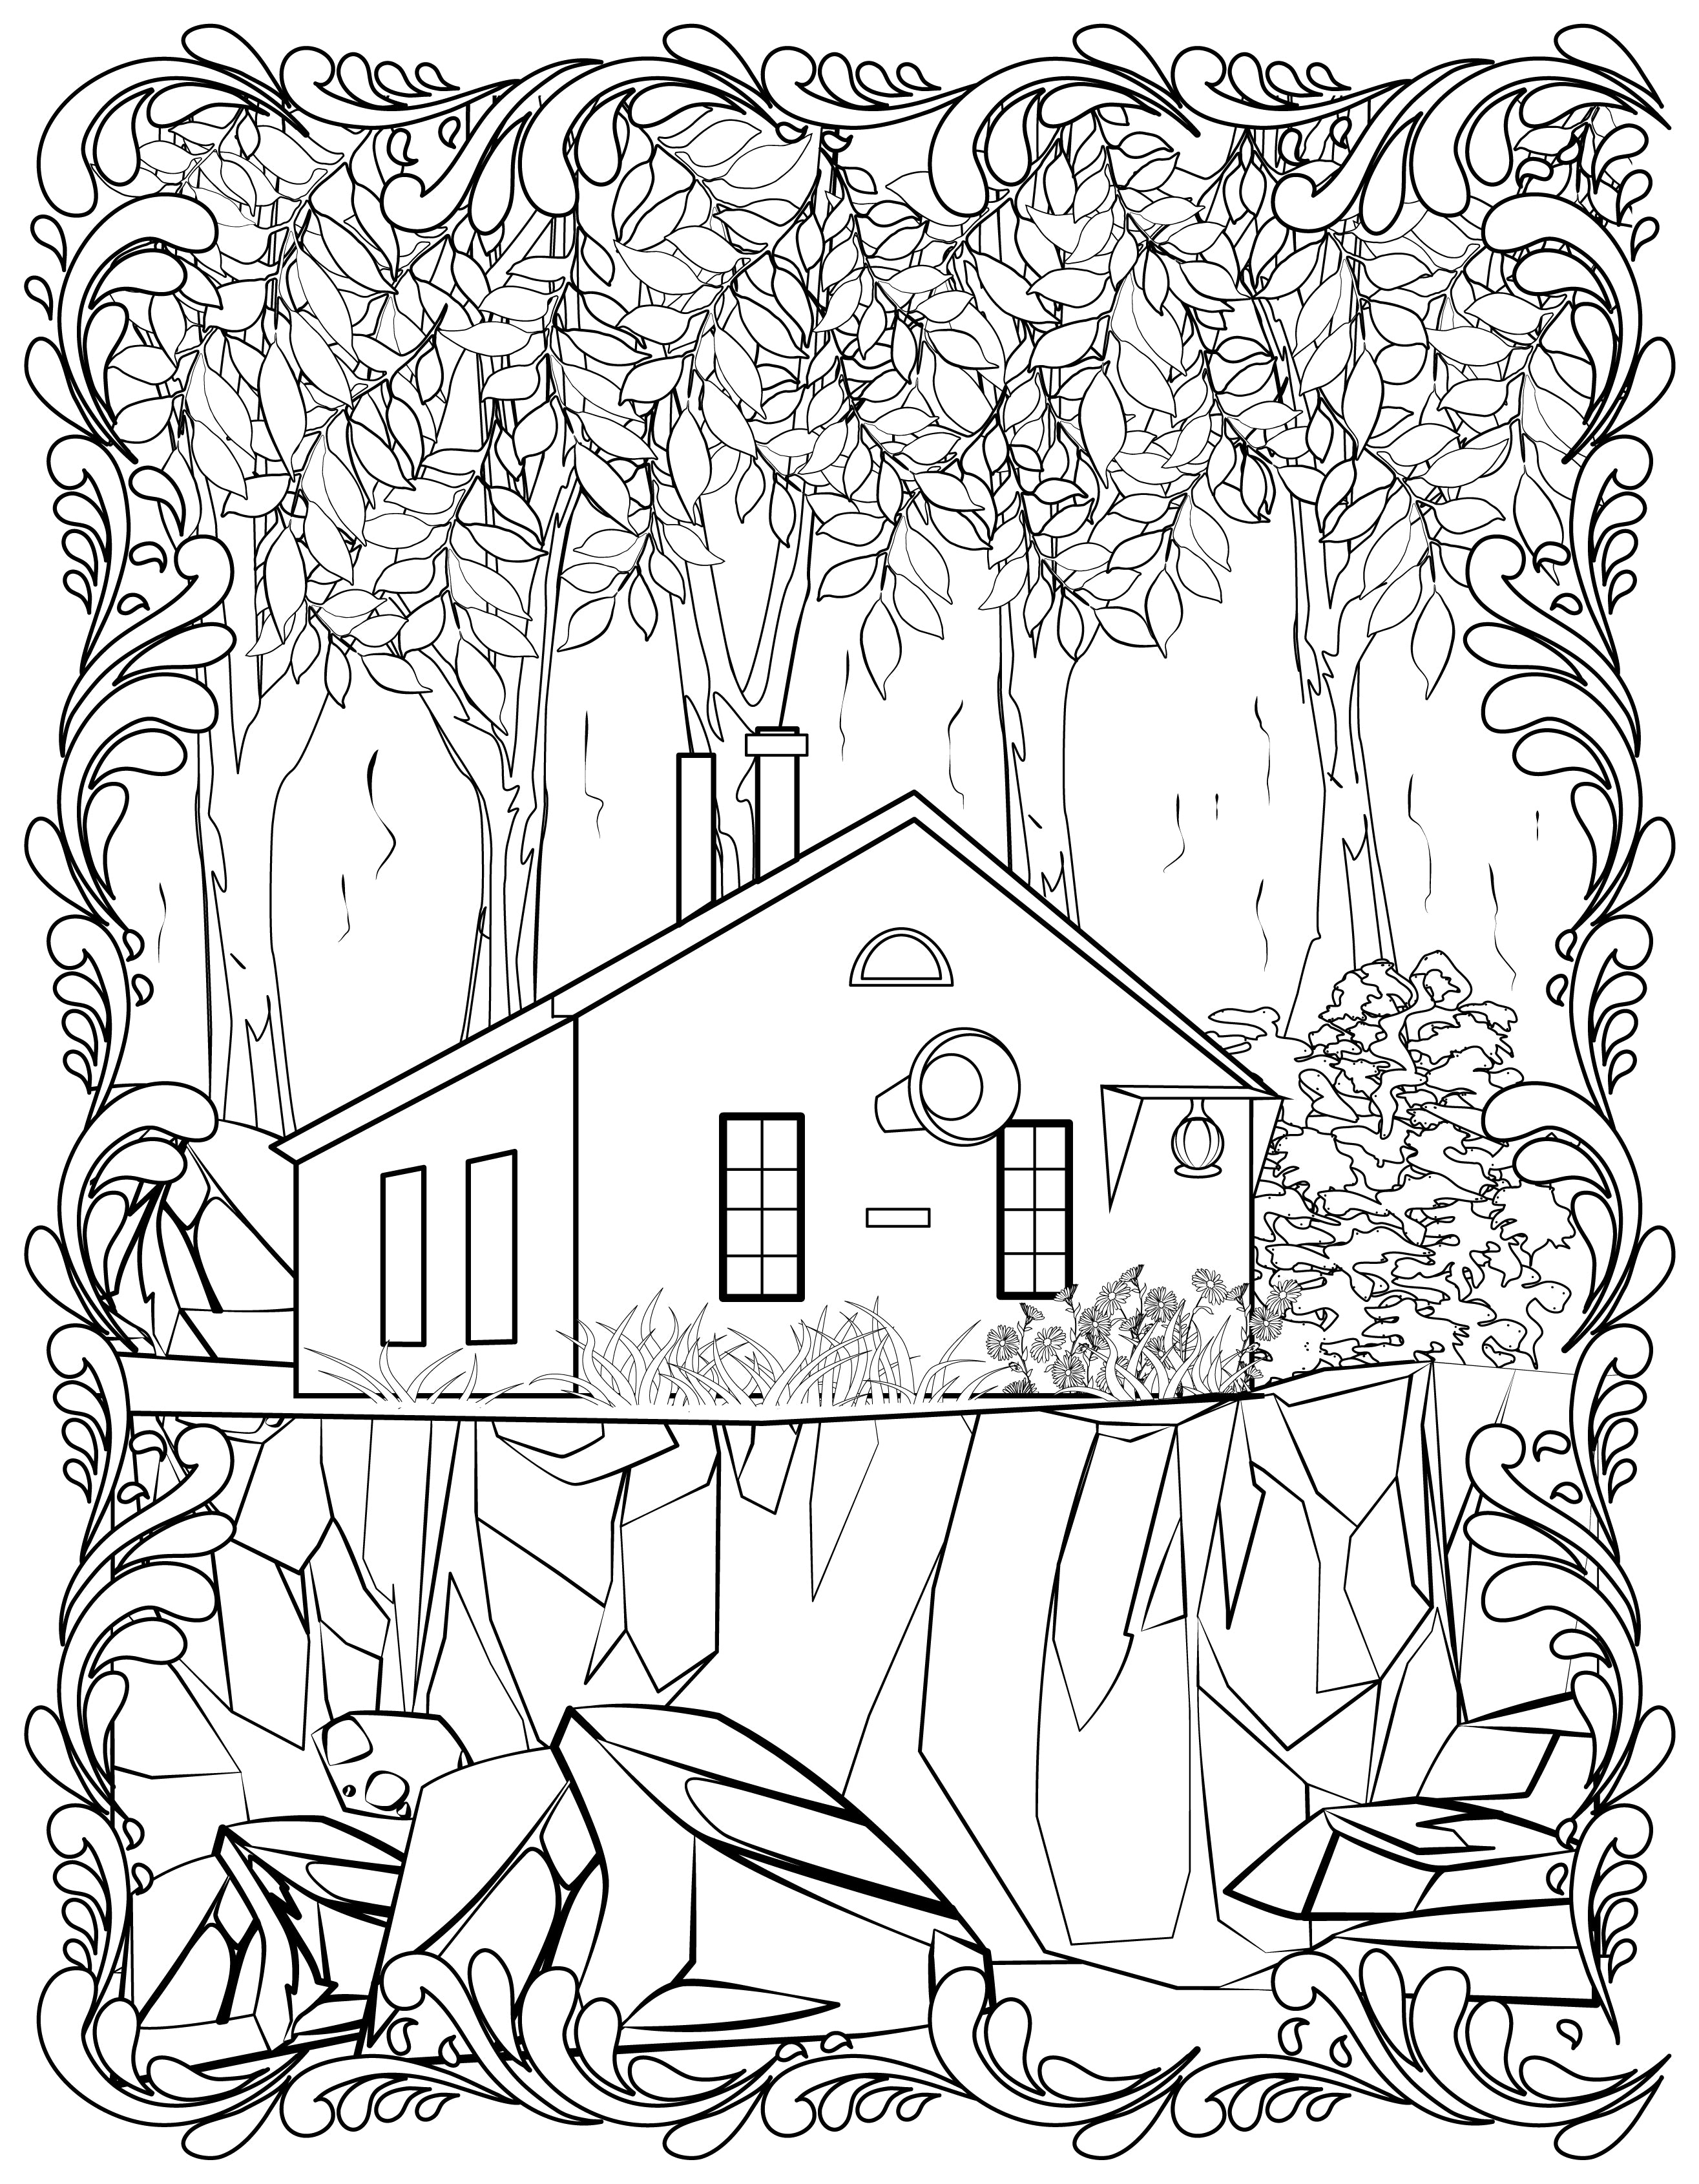 Single Coloring Book Page - Slip Point Lighthouse, Washington - Digital Print-from-Home